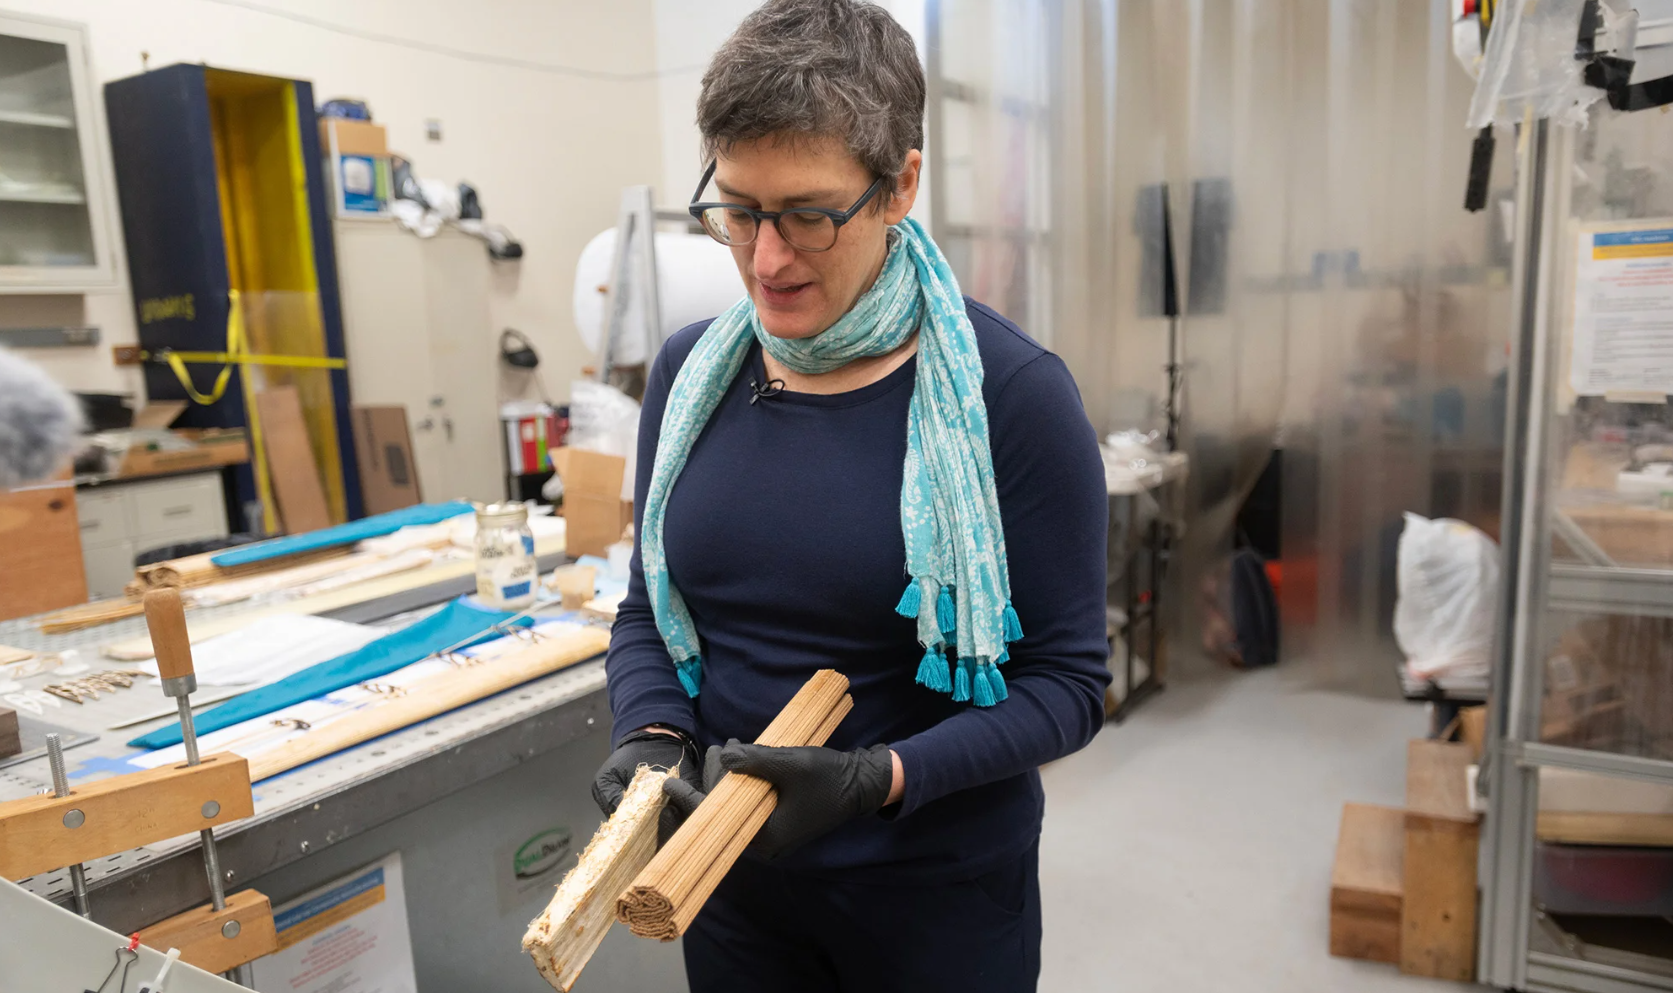 Woman holds rectangular materials in a lab